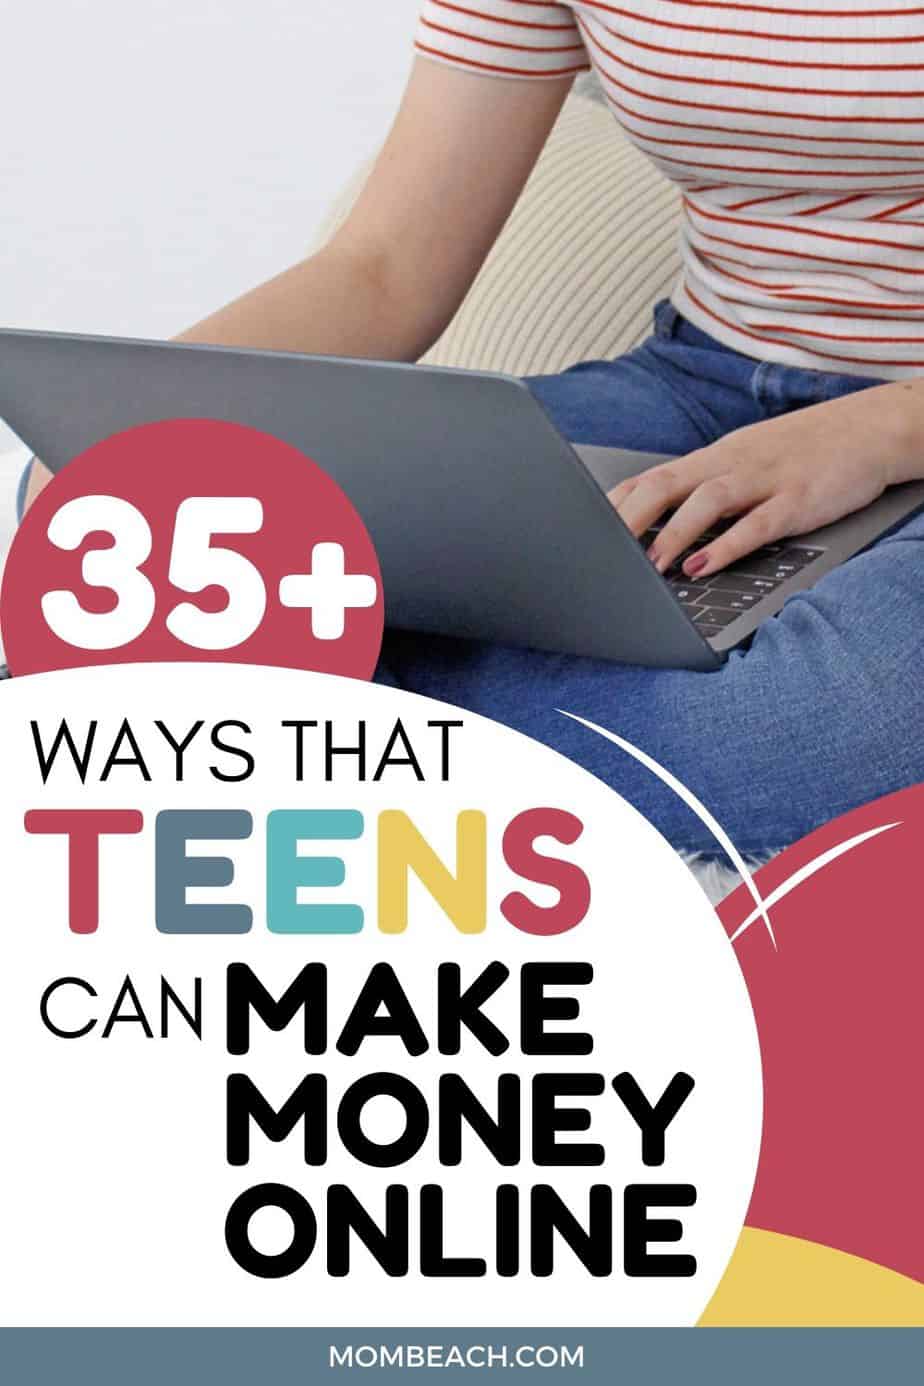 Check out our awesome 35+ ideas on how teens can make money online. They can sell DIY things or crafts to sell online to make money and so much more. If teens need something to do if they are bored, then why not spend time making money online! Turn hobbies into cash right now! There are even small business ideas and jobs for teens to earn money from home right away. #howcanteensmakemoneyonline #smallbusinessideasforteens #howcanteensmakemoney #makemoneyonlineteens #onlinejobsforteens